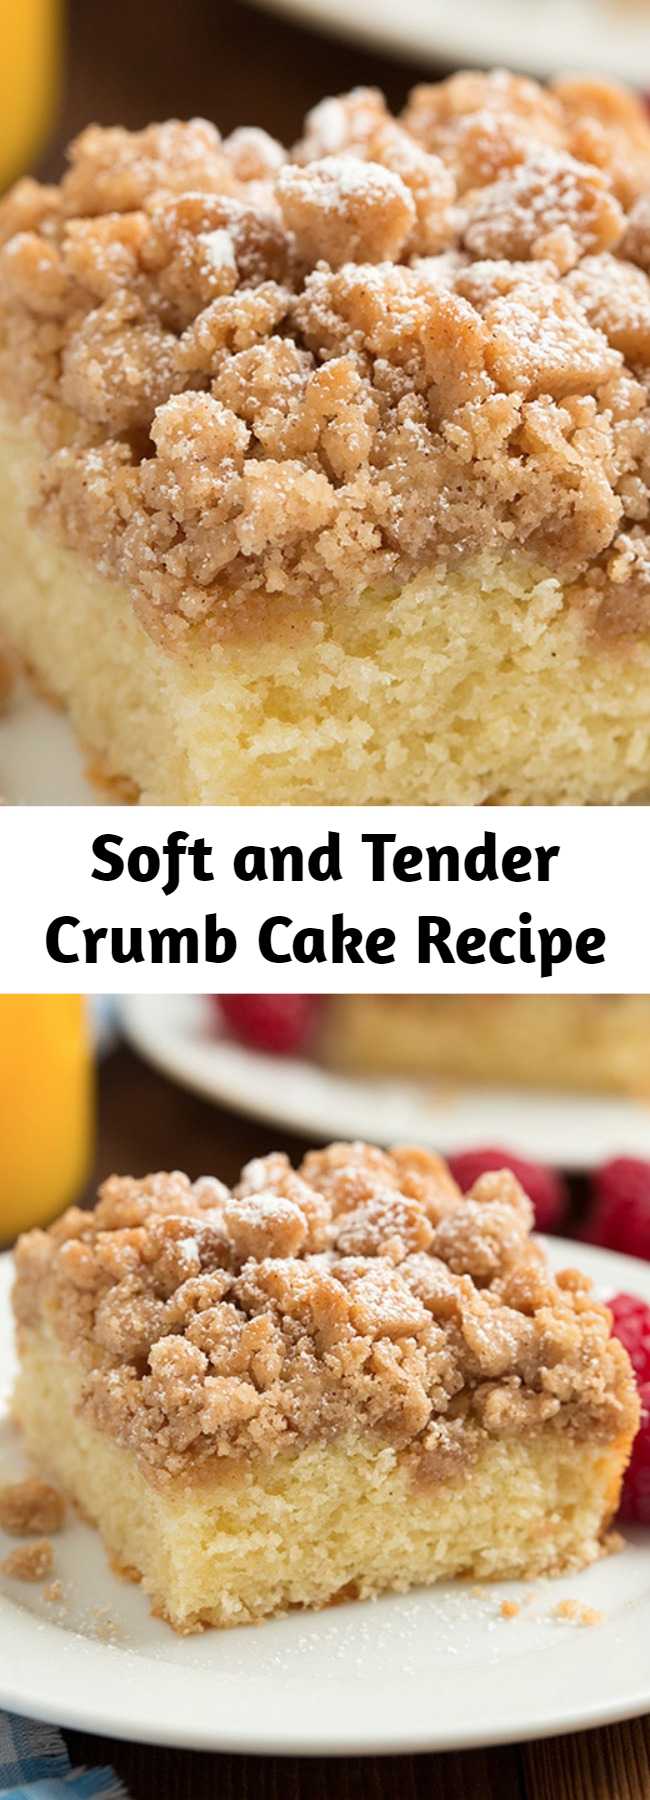 Soft and Tender Crumb Cake Recipe - A deliciously soft and tender cake topped with a crisp buttery crumble. Perfect for a weekend breakfast or holiday brunch.